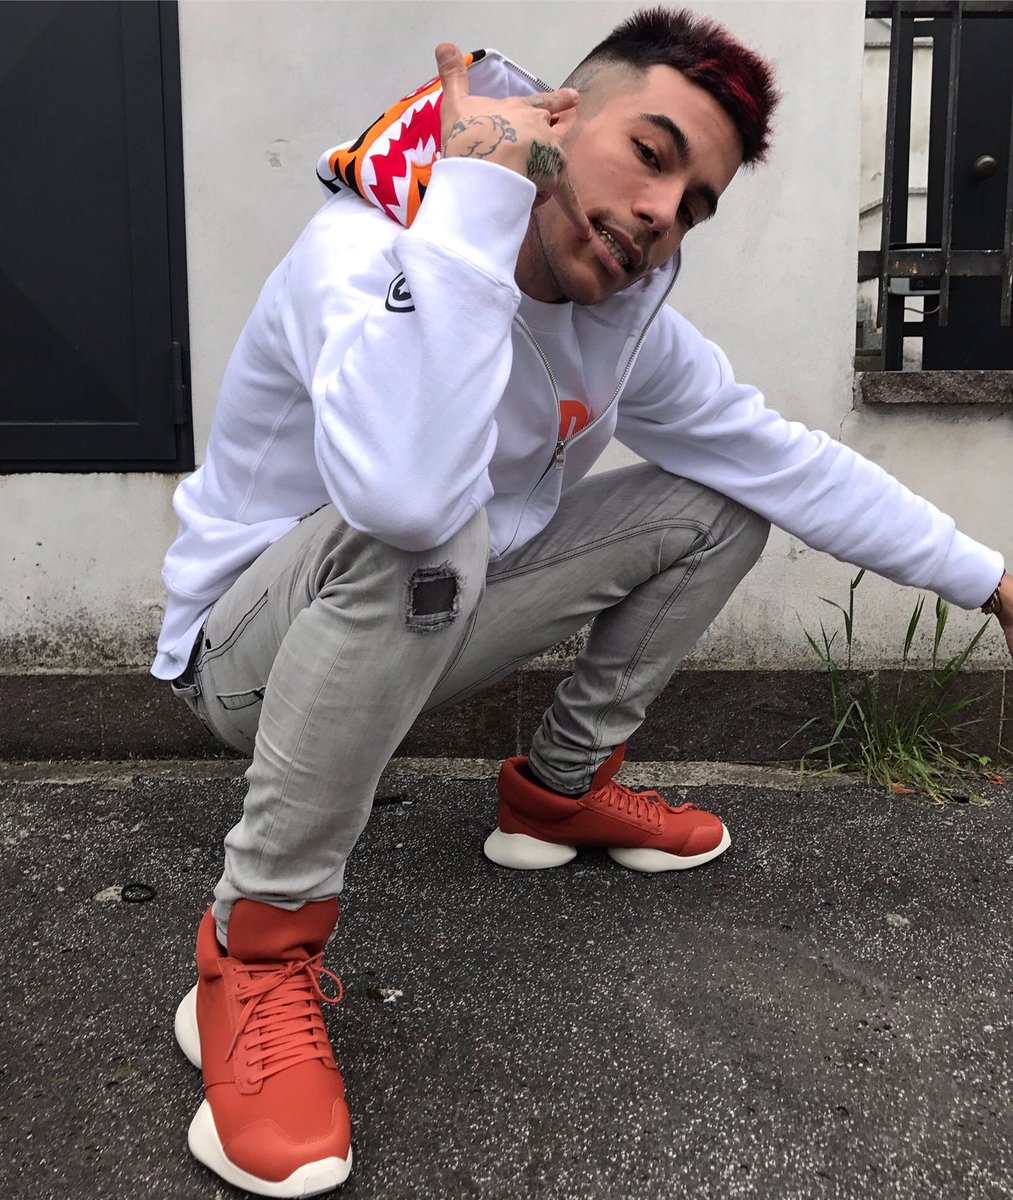 Sfera Ebbasta Outfit on Twitter: 